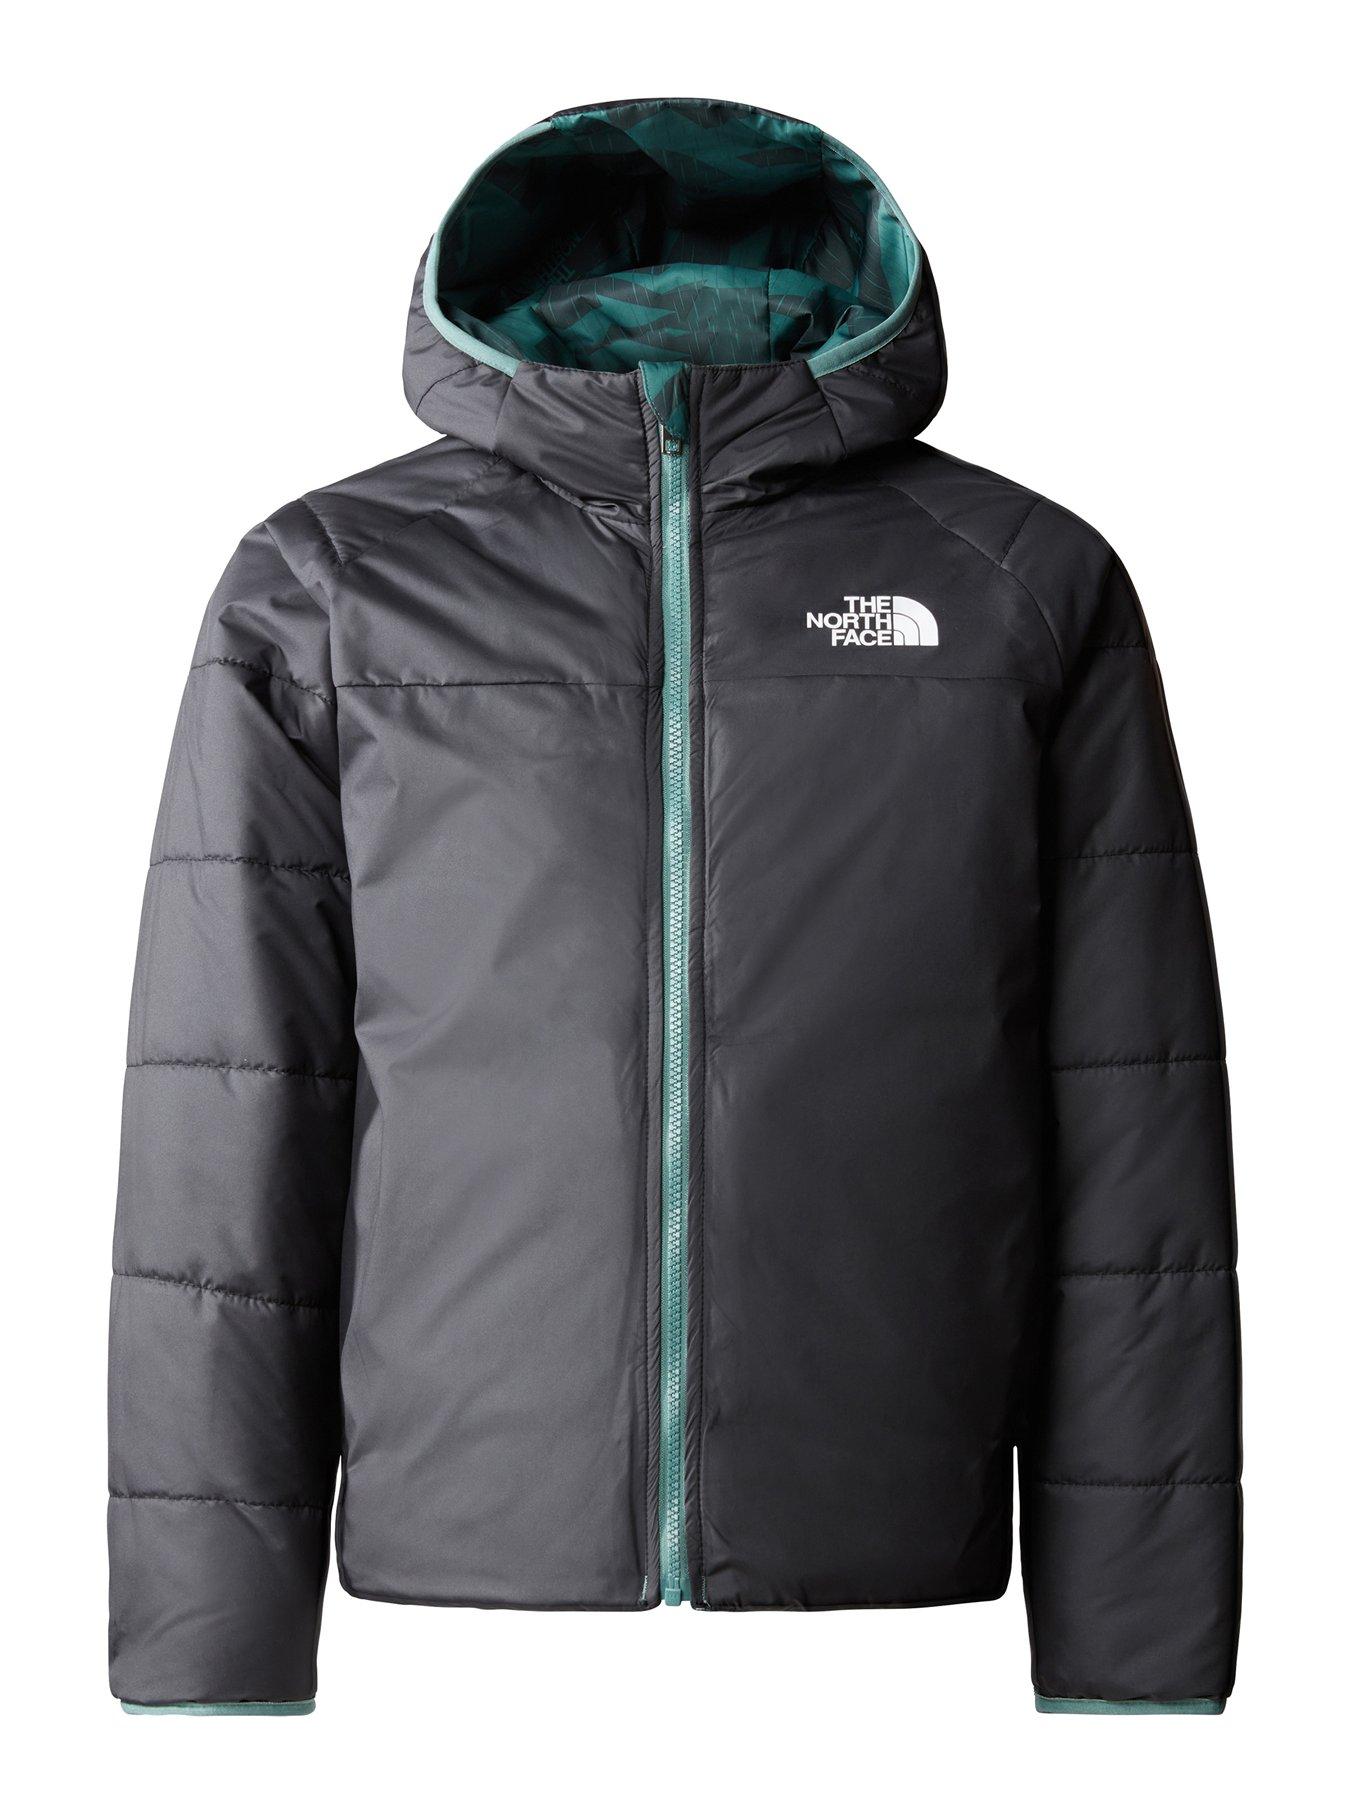 THE NORTH FACE Boys Reversible Perrito Jacket - Print | very.co.uk